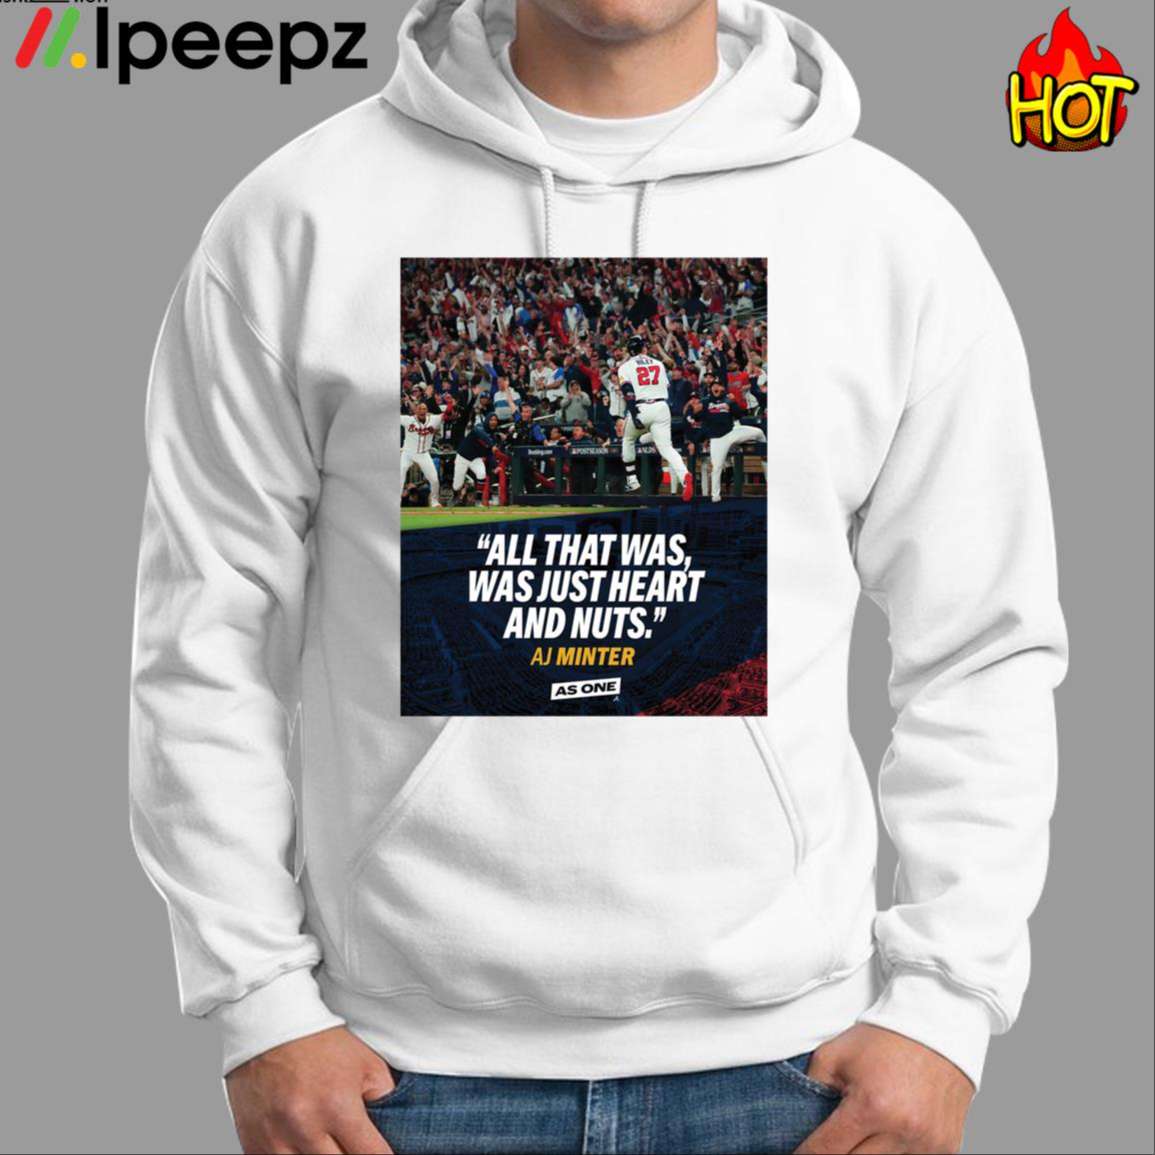 Ipeepz All That Was Was Just Heart and Nuts AJ Minter Shirt